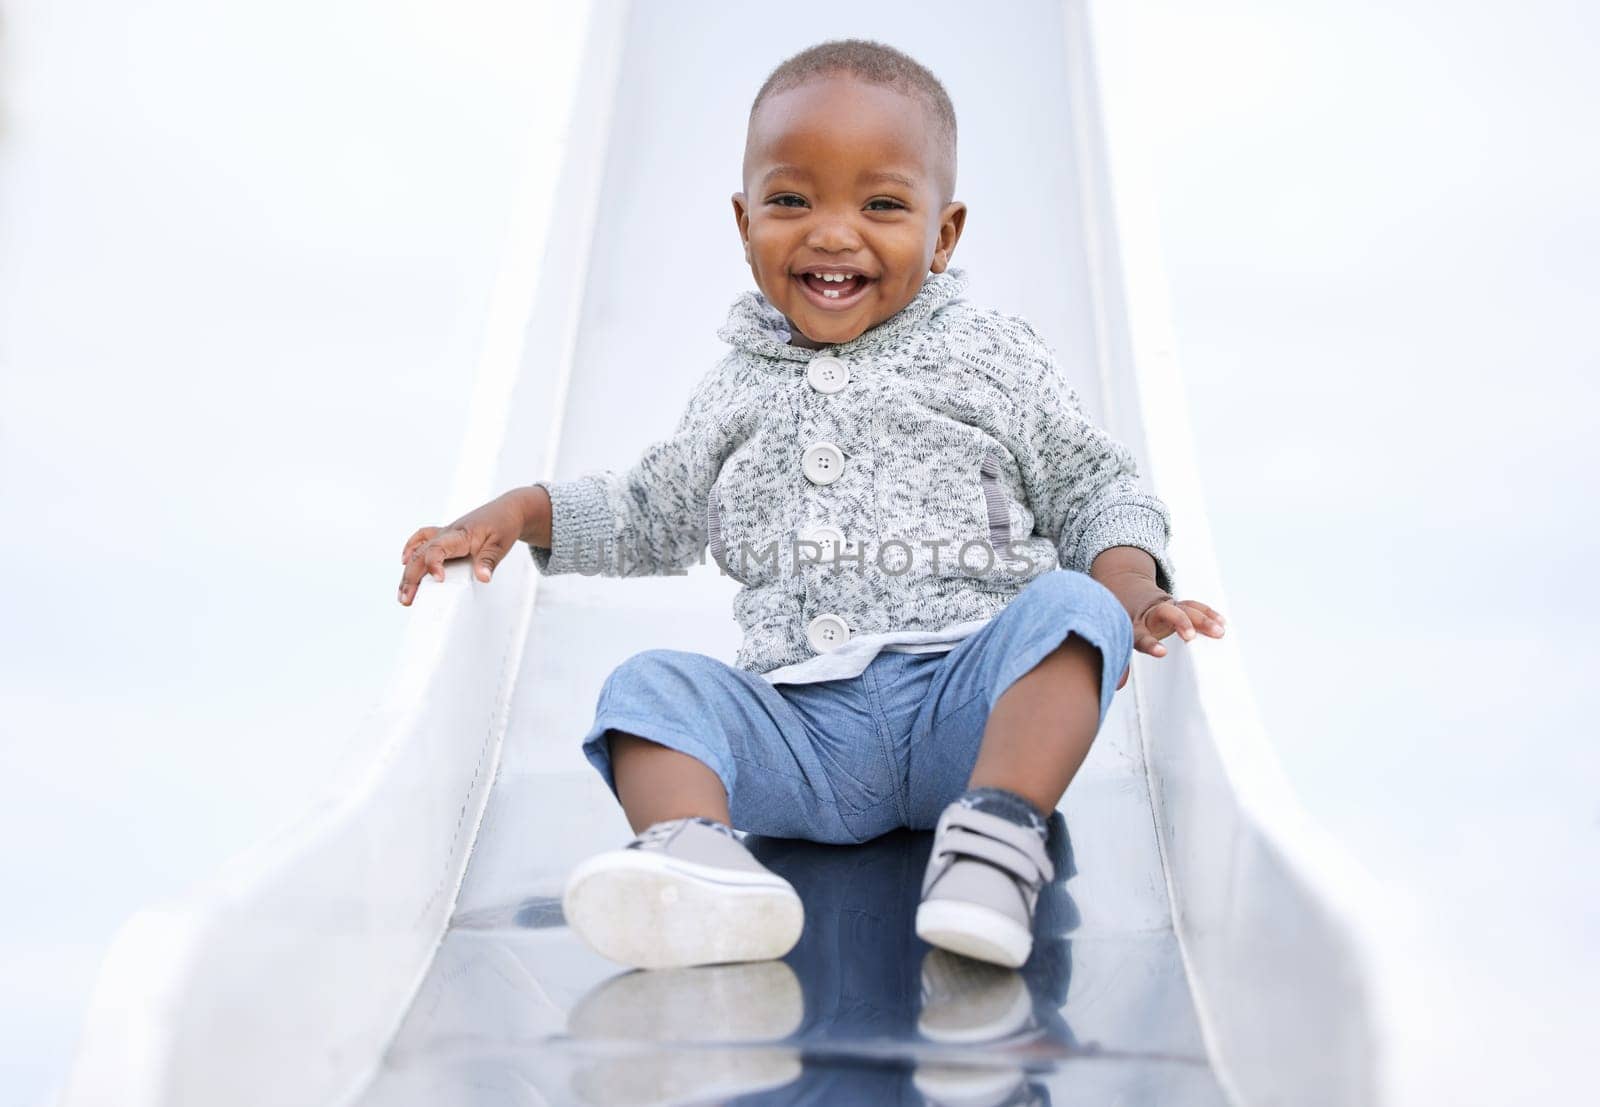 African baby, boy and slide at playground, portrait and excited for playing, learning and play in summer. Toddler, child and happy at park for games, laugh or outdoor for development at kindergarten.